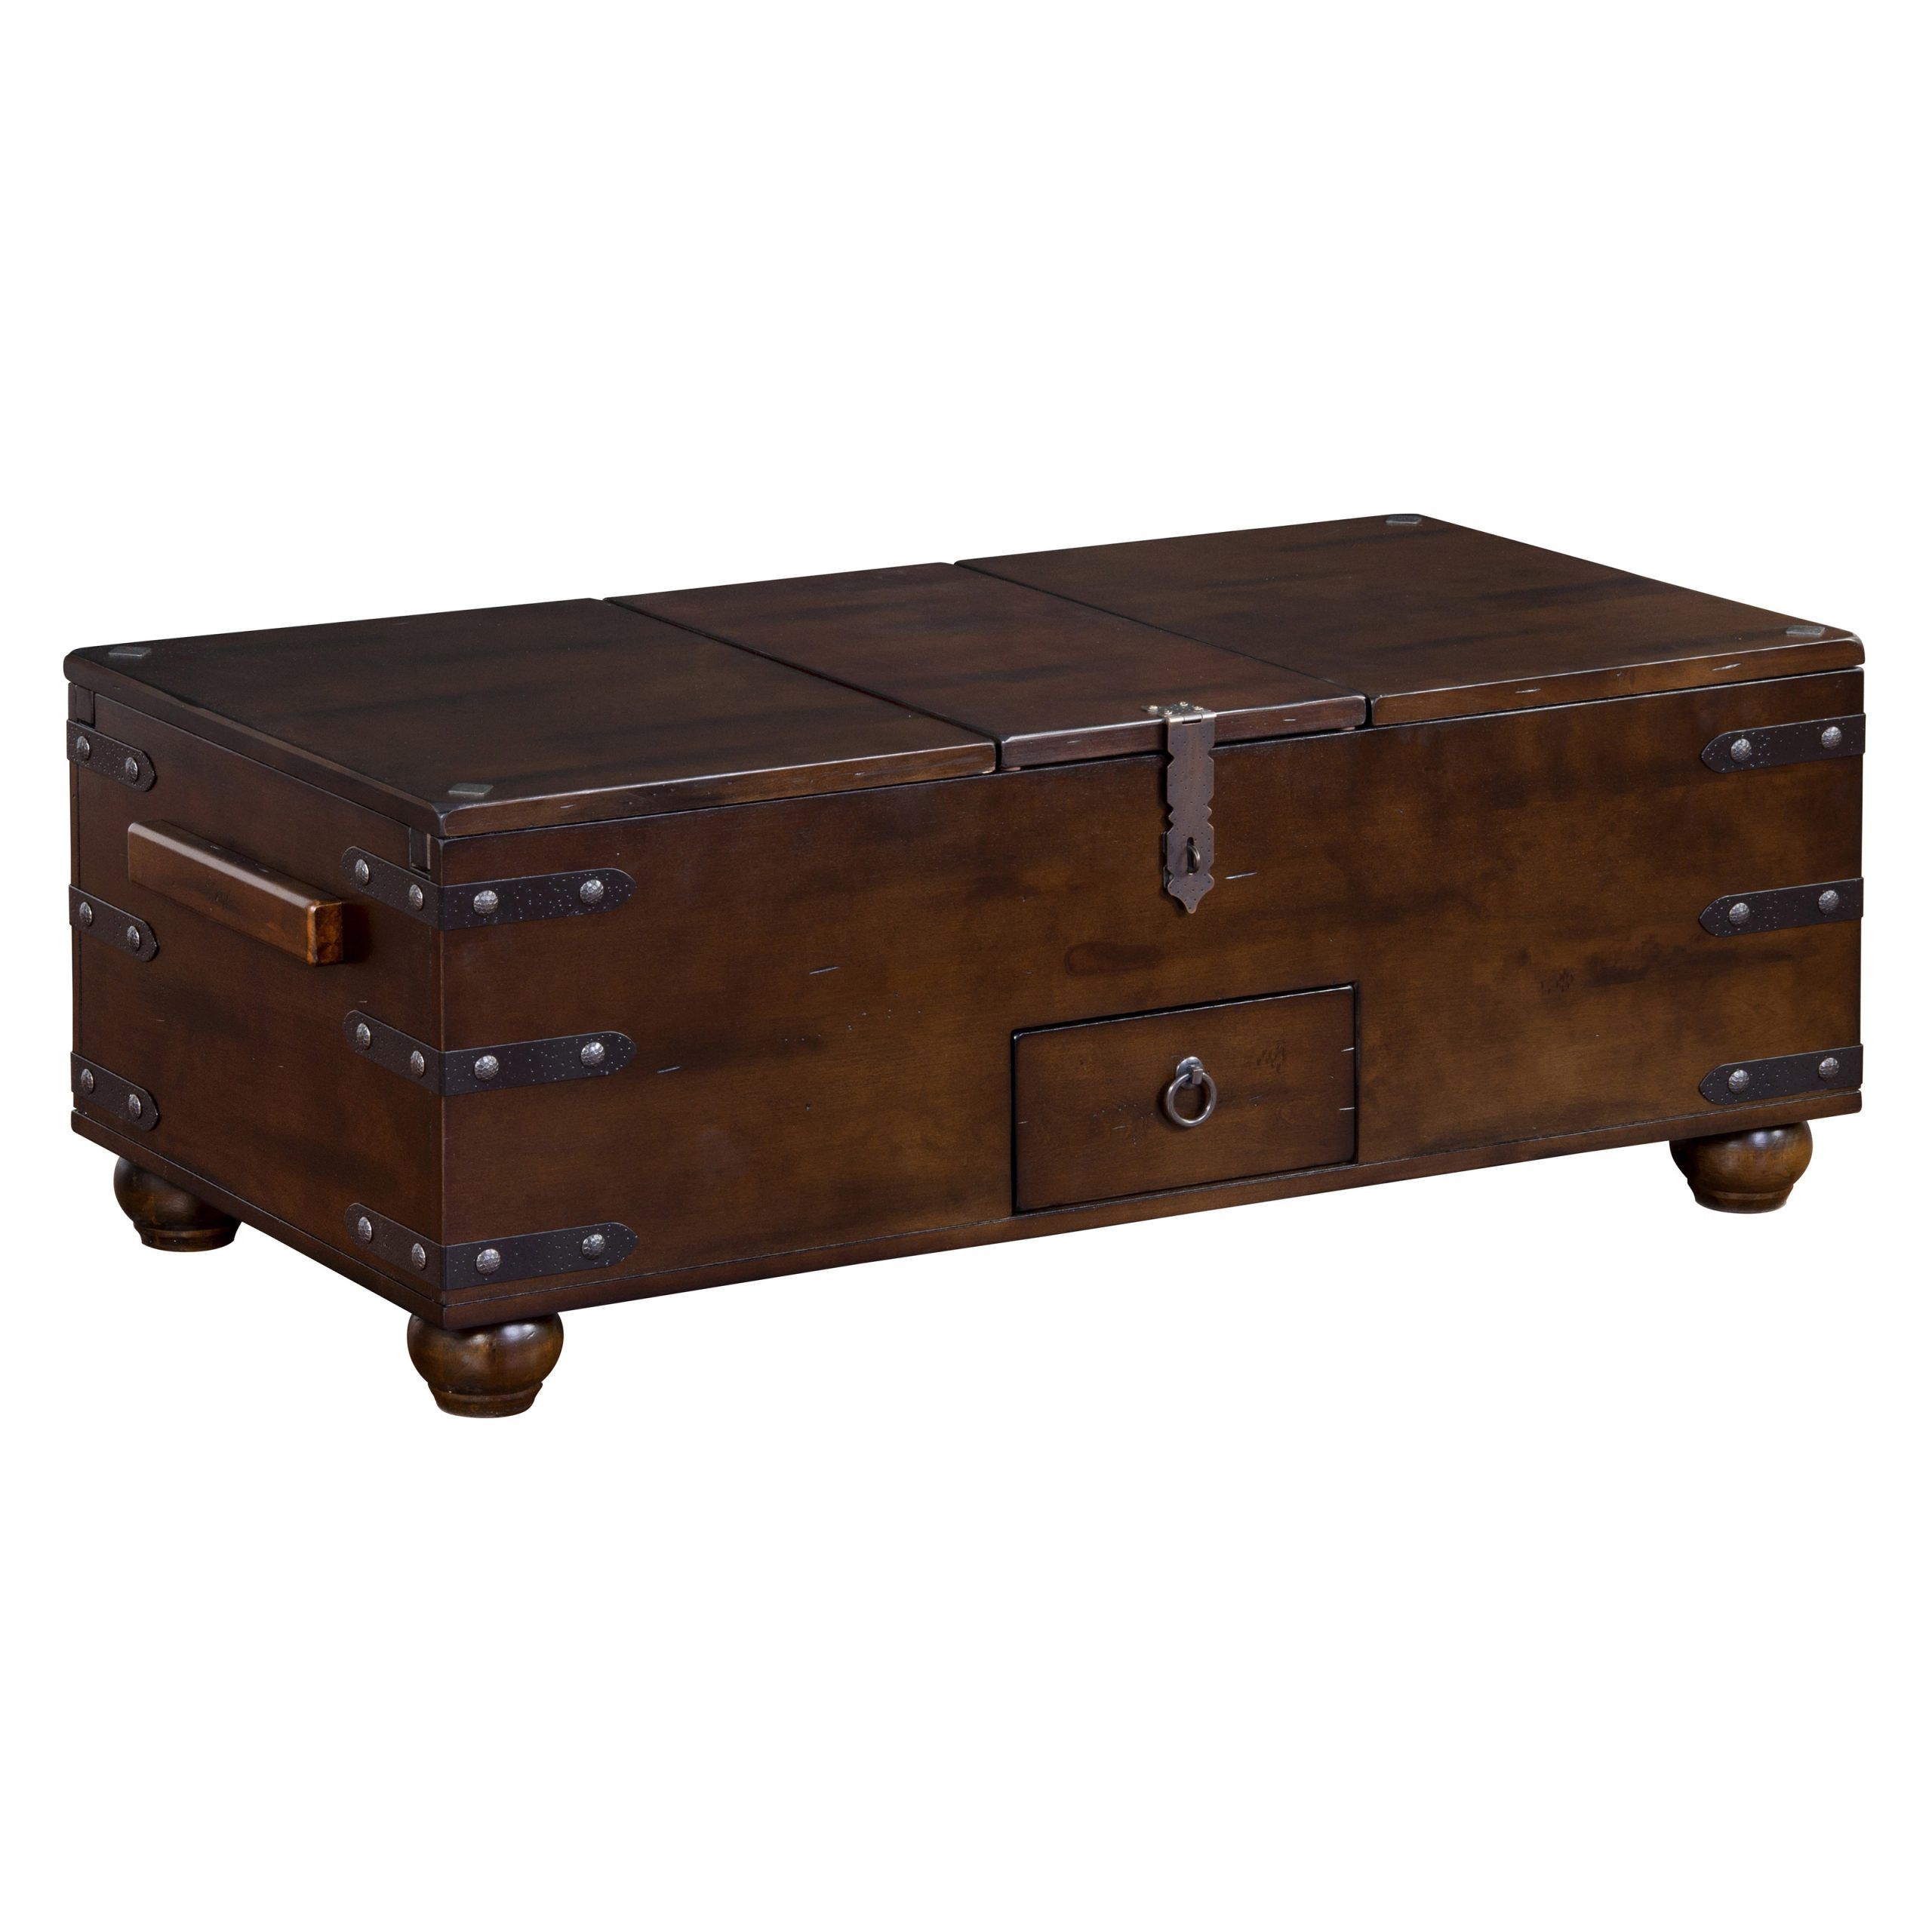 Sunny Designs Santa Fe Trunk Coffee Table – Coffee Tables Pertaining To Preferred Espresso Wood Trunk Cocktail Tables (View 13 of 20)